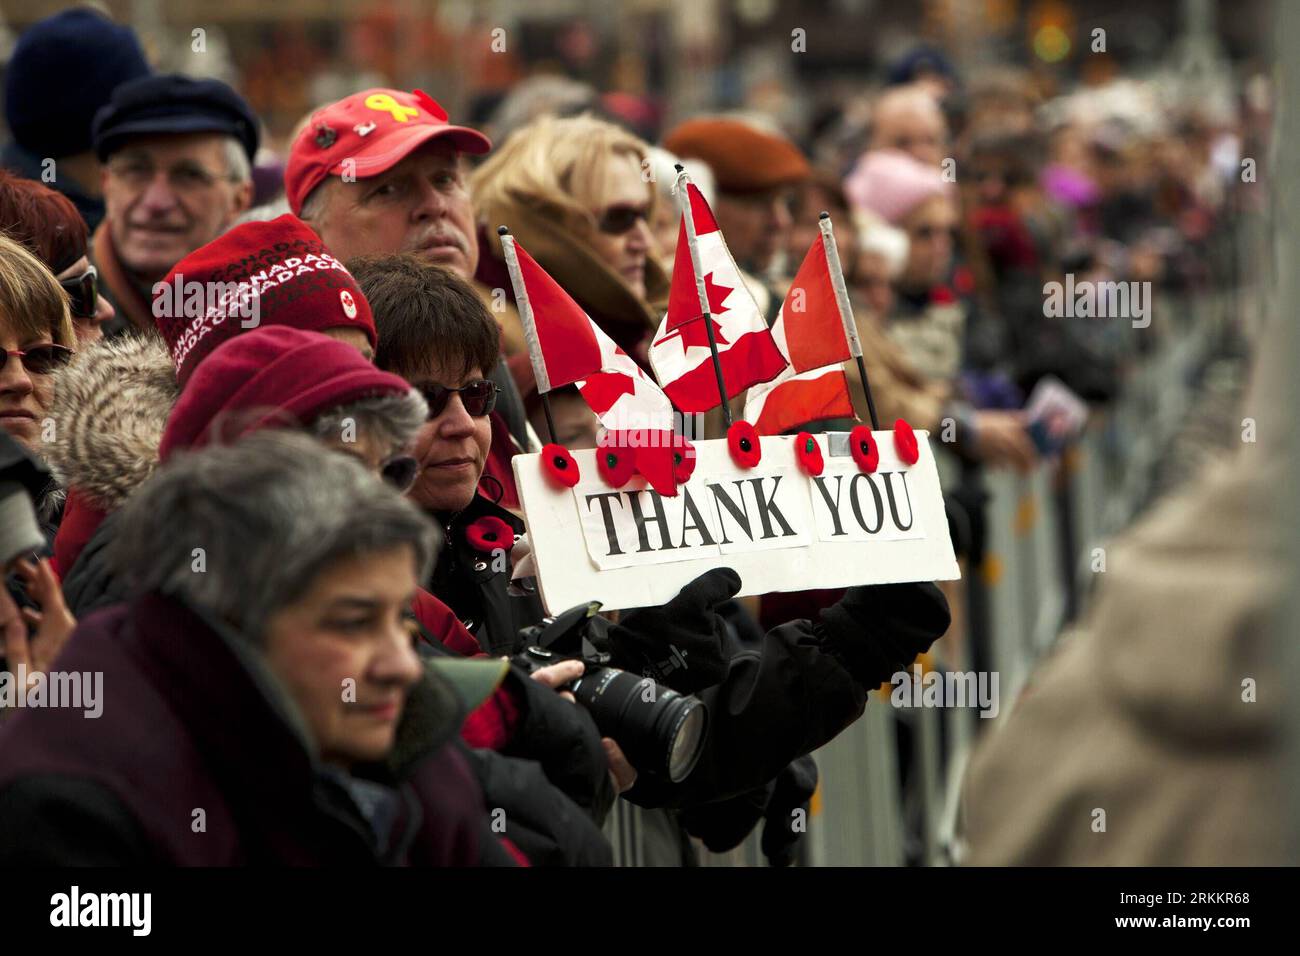 Bildnummer: 56272985  Datum: 11.11.2011  Copyright: imago/Xinhua (111112) -- OTTAWA, Nov. 12, 2011 (Xinhua) -- Canadians attend the Remembrance Day ceremony at the National War Memorial in Ottawa, Canada, on Nov. 11, 2011. The Remembrance Day is a memorial day observed in the Commonwealth countries to remember the sacrifice of the members of the armed forces and civilians in times of war, specifically since World War I. This day is observed on Nov. 11 to recall the official end of World War I at 11 a.m. on Nov. 11, 1918, with Germany s surrendering and signing the Armistice. (Xinhua/Christophe Stock Photo